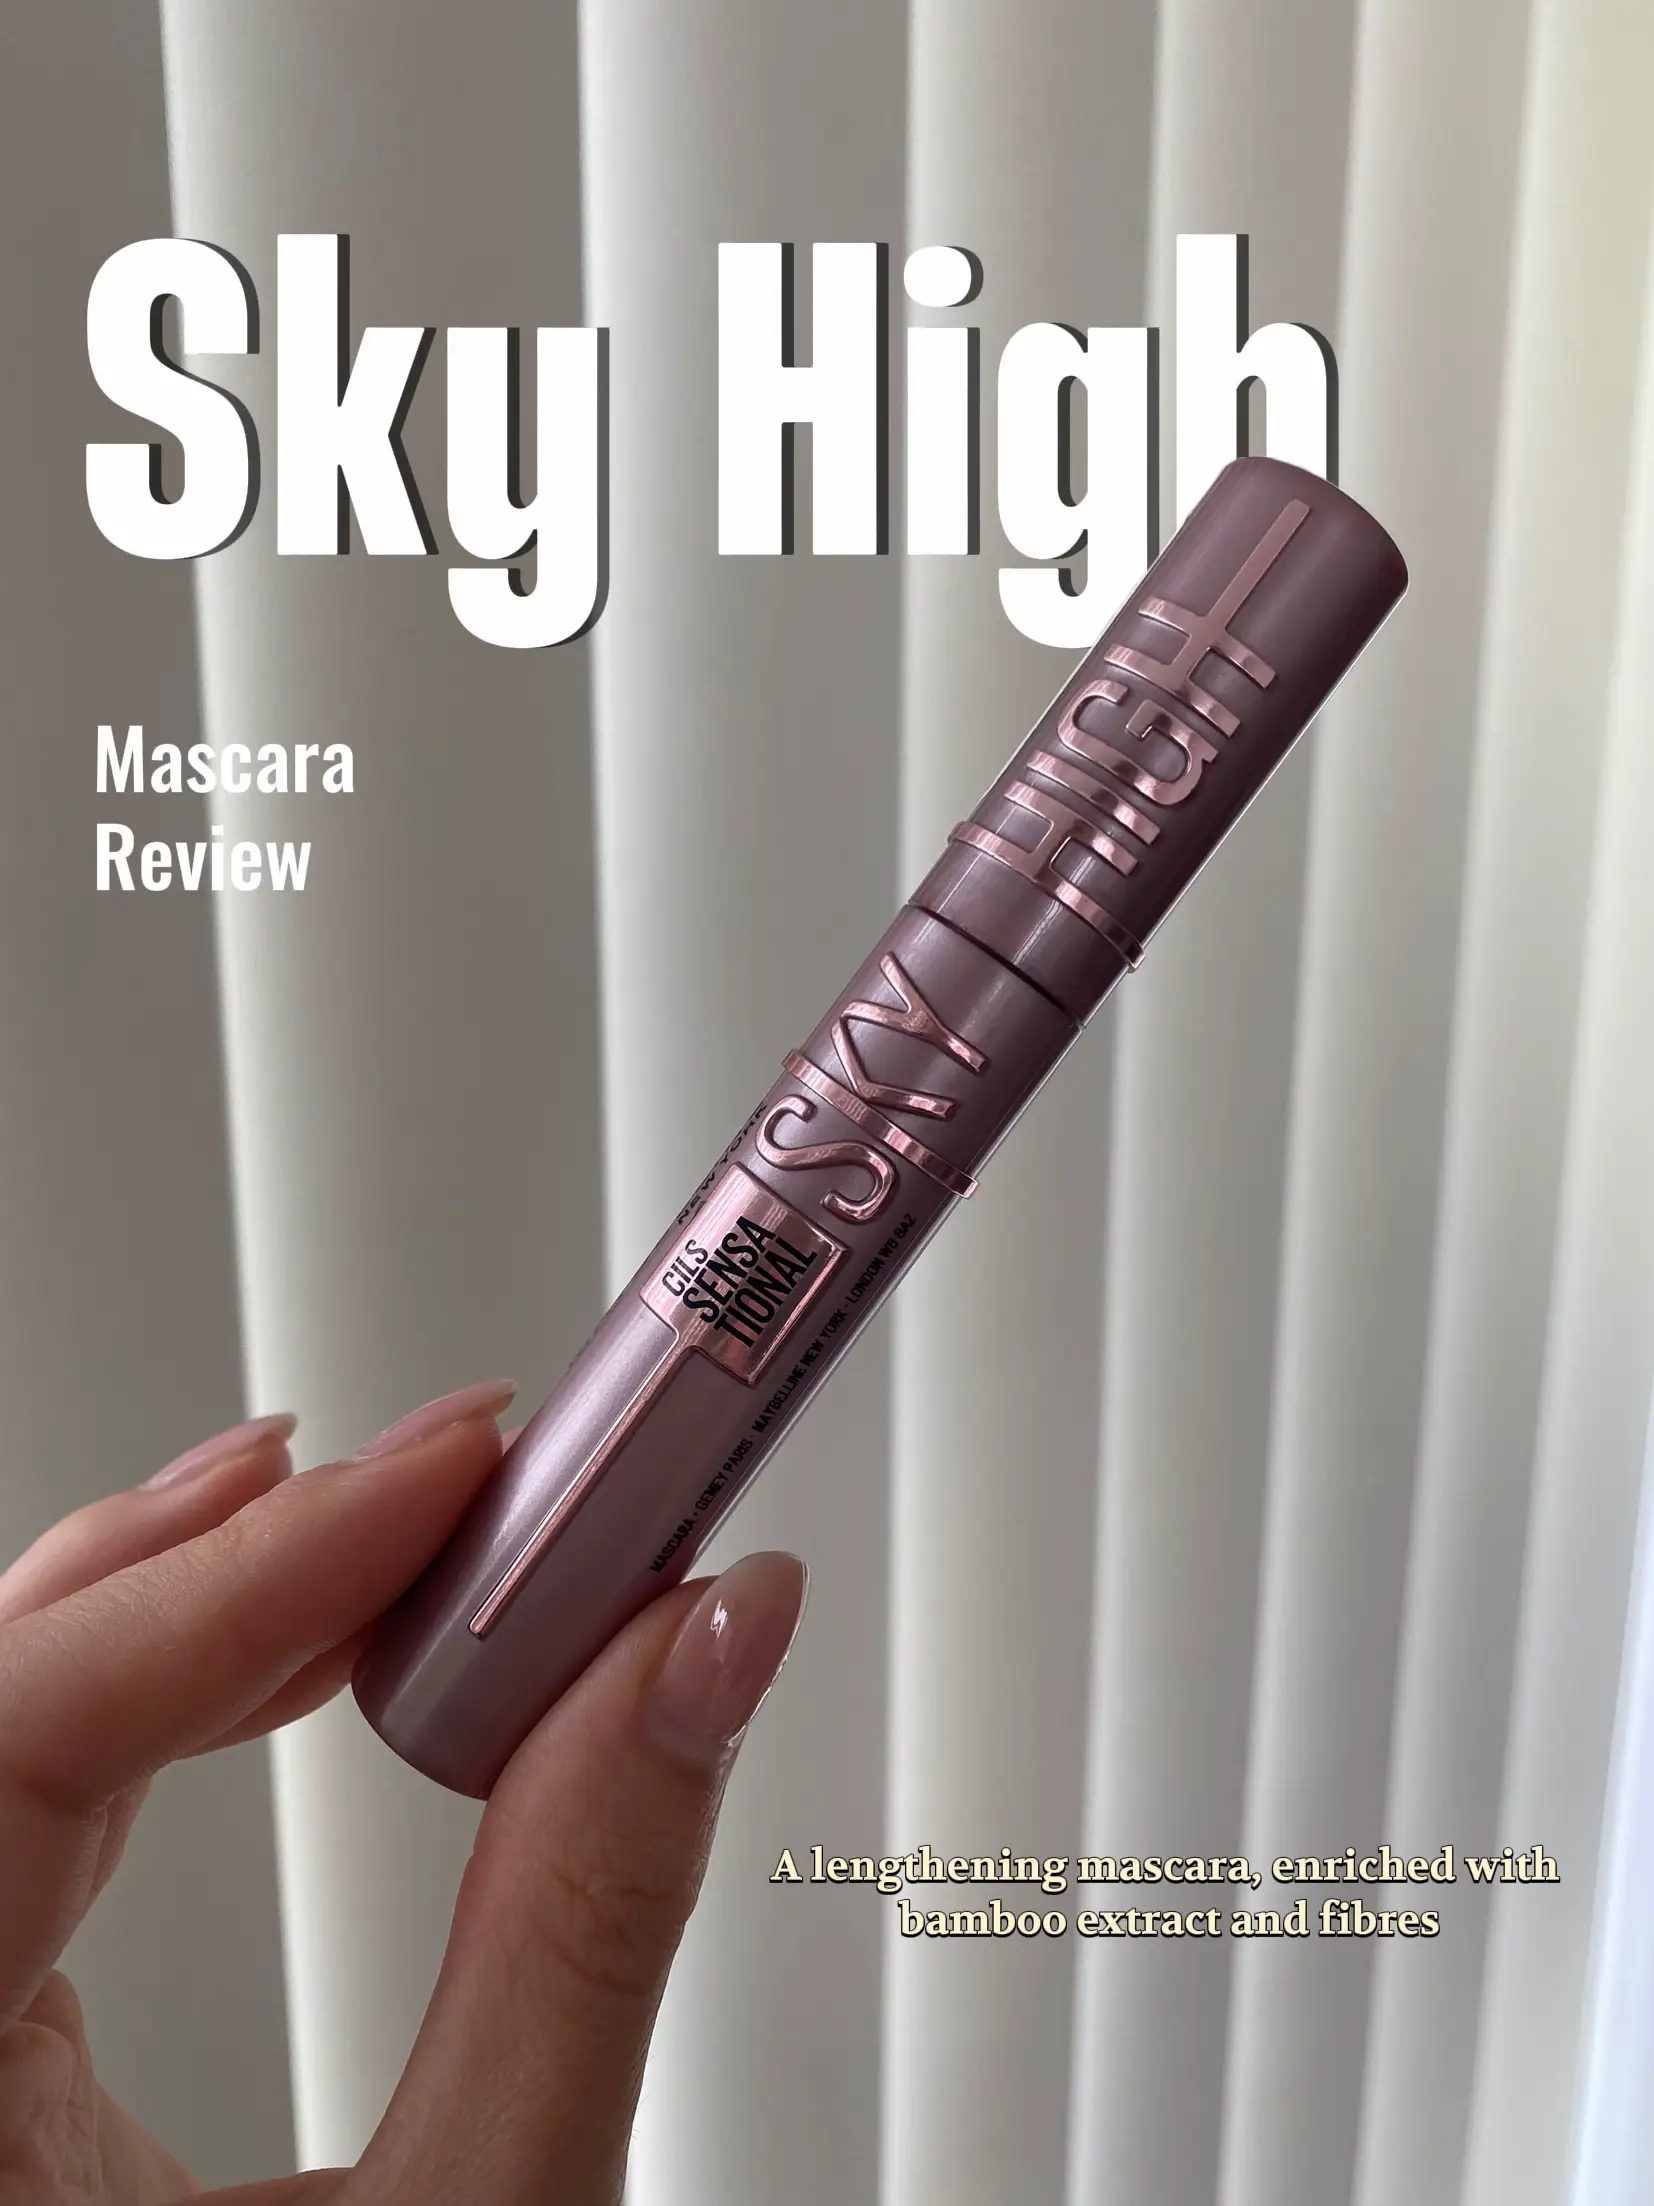 Maybelline Sky High Mascara Paceana | | | Diana by Gallery Review Lemon8 posted